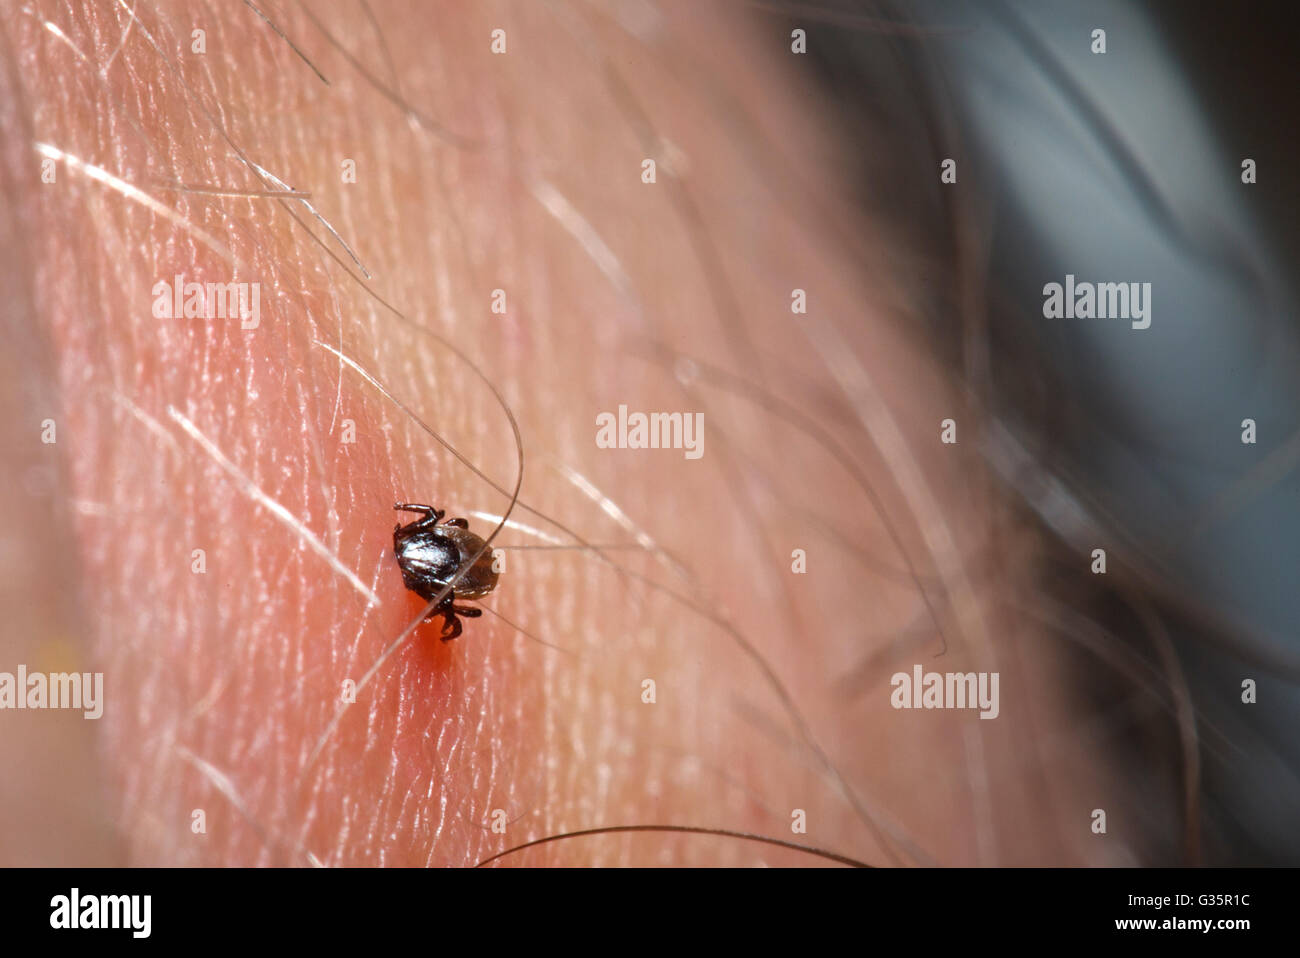 A tick embedded into a human Stock Photo